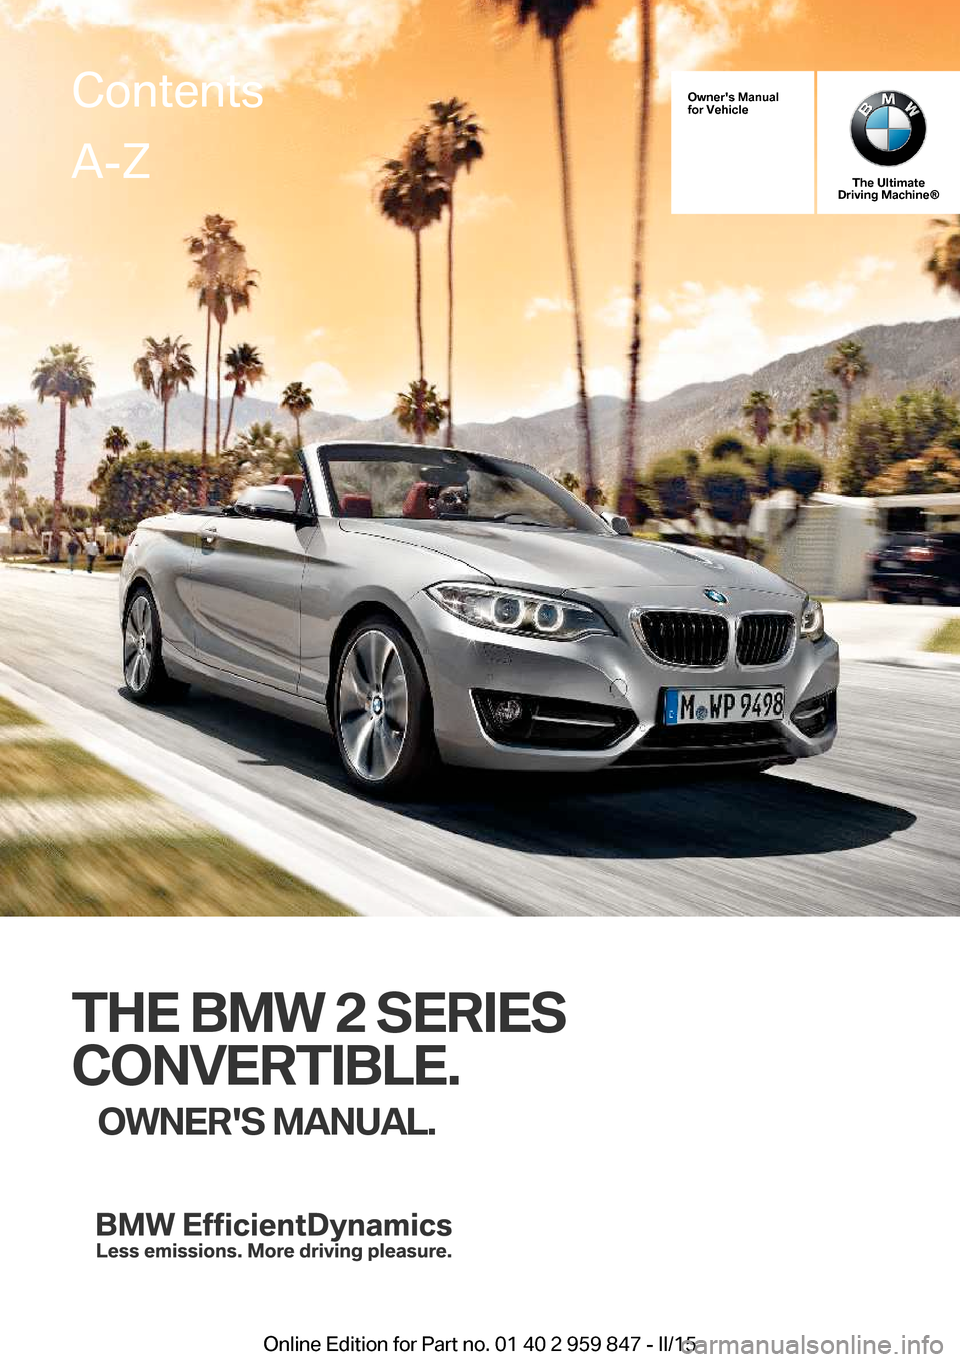 BMW 2 SERIES CONVERTIBLE 2015 F23 Owners Manual 